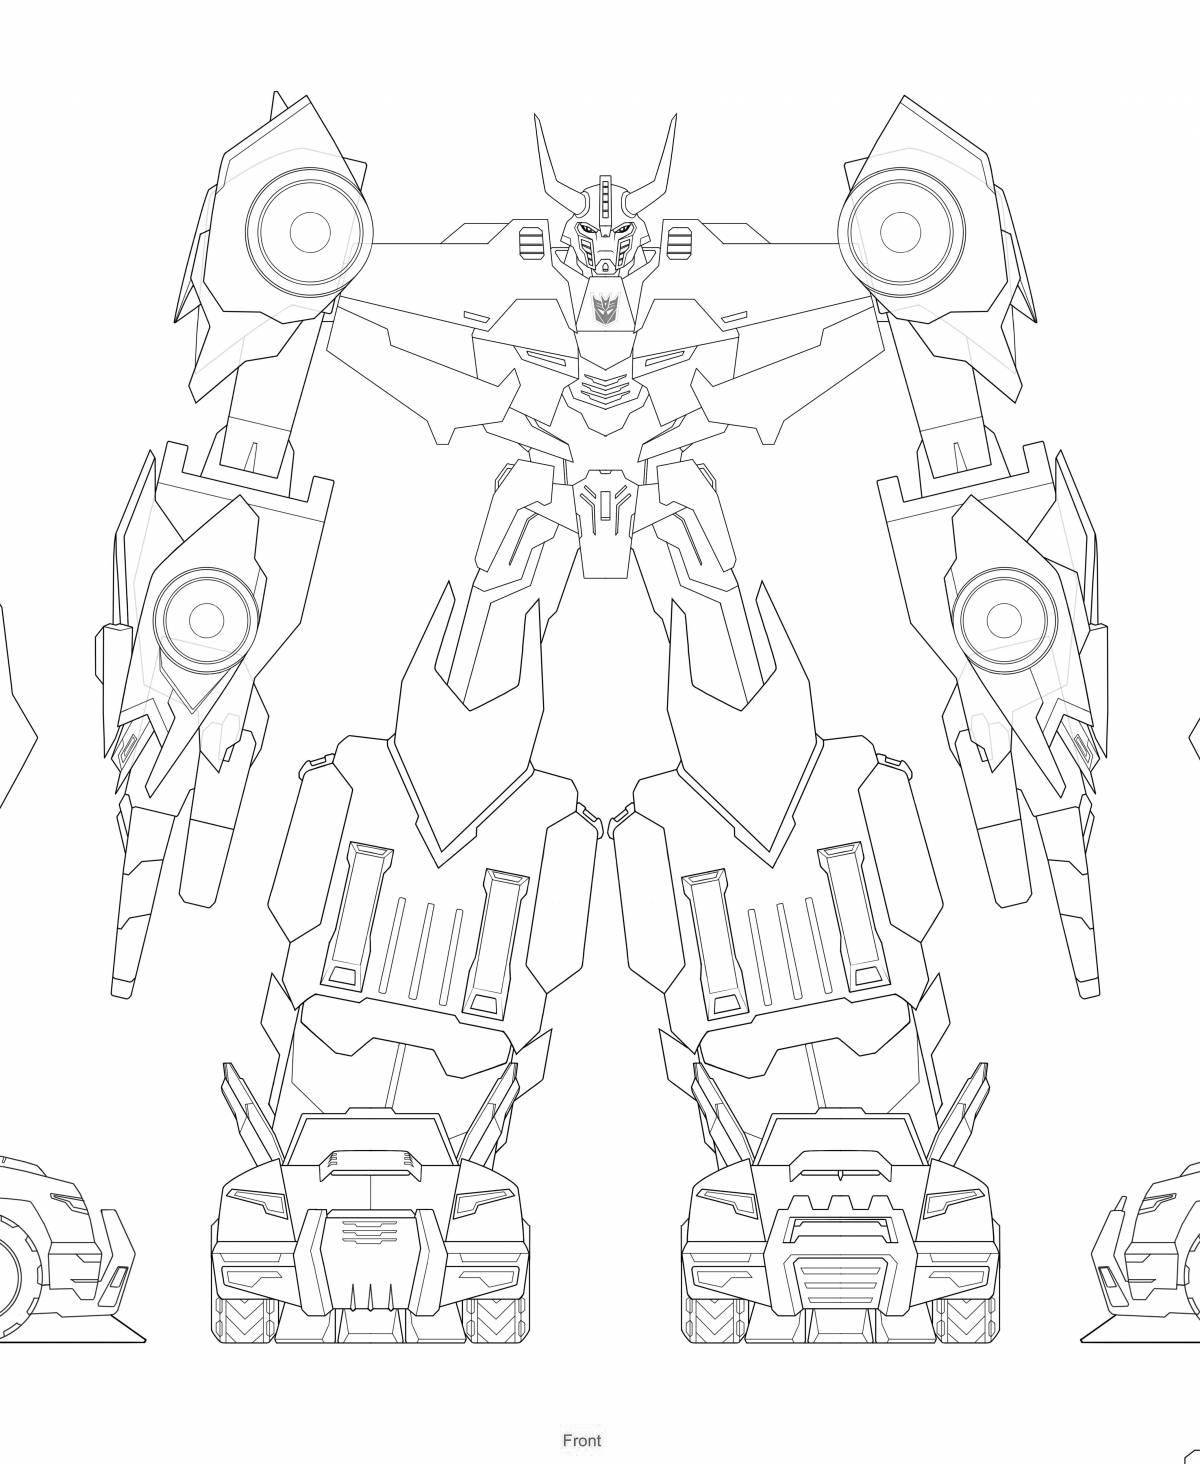 Decepticons deluxe coloring page